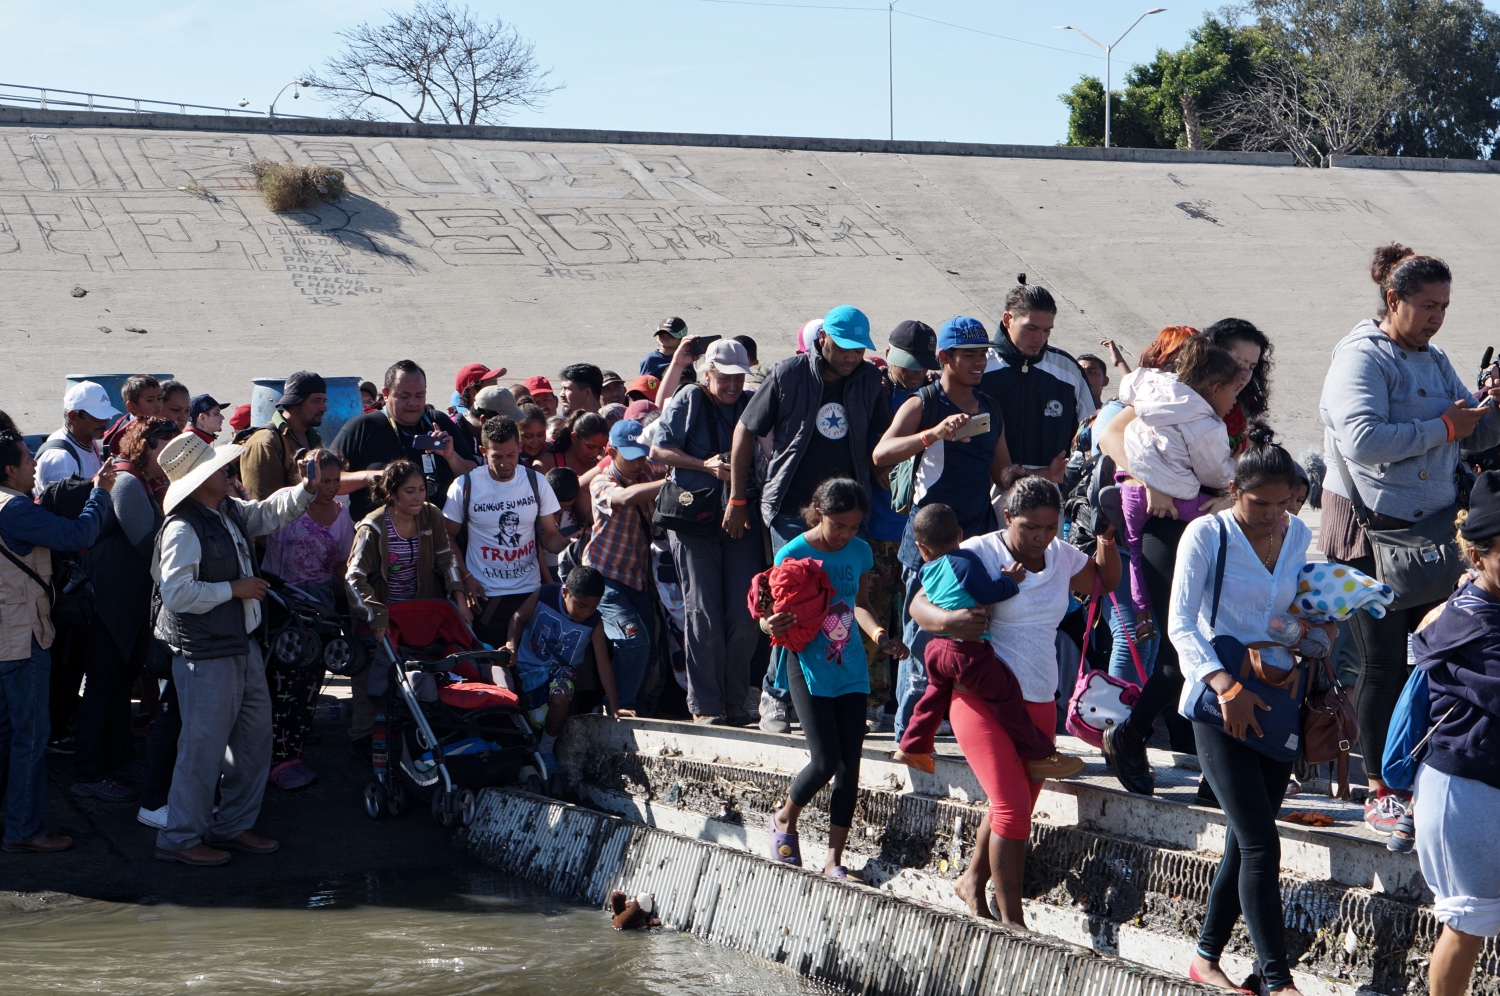 Why the term “Migrant Caravan” is problematic